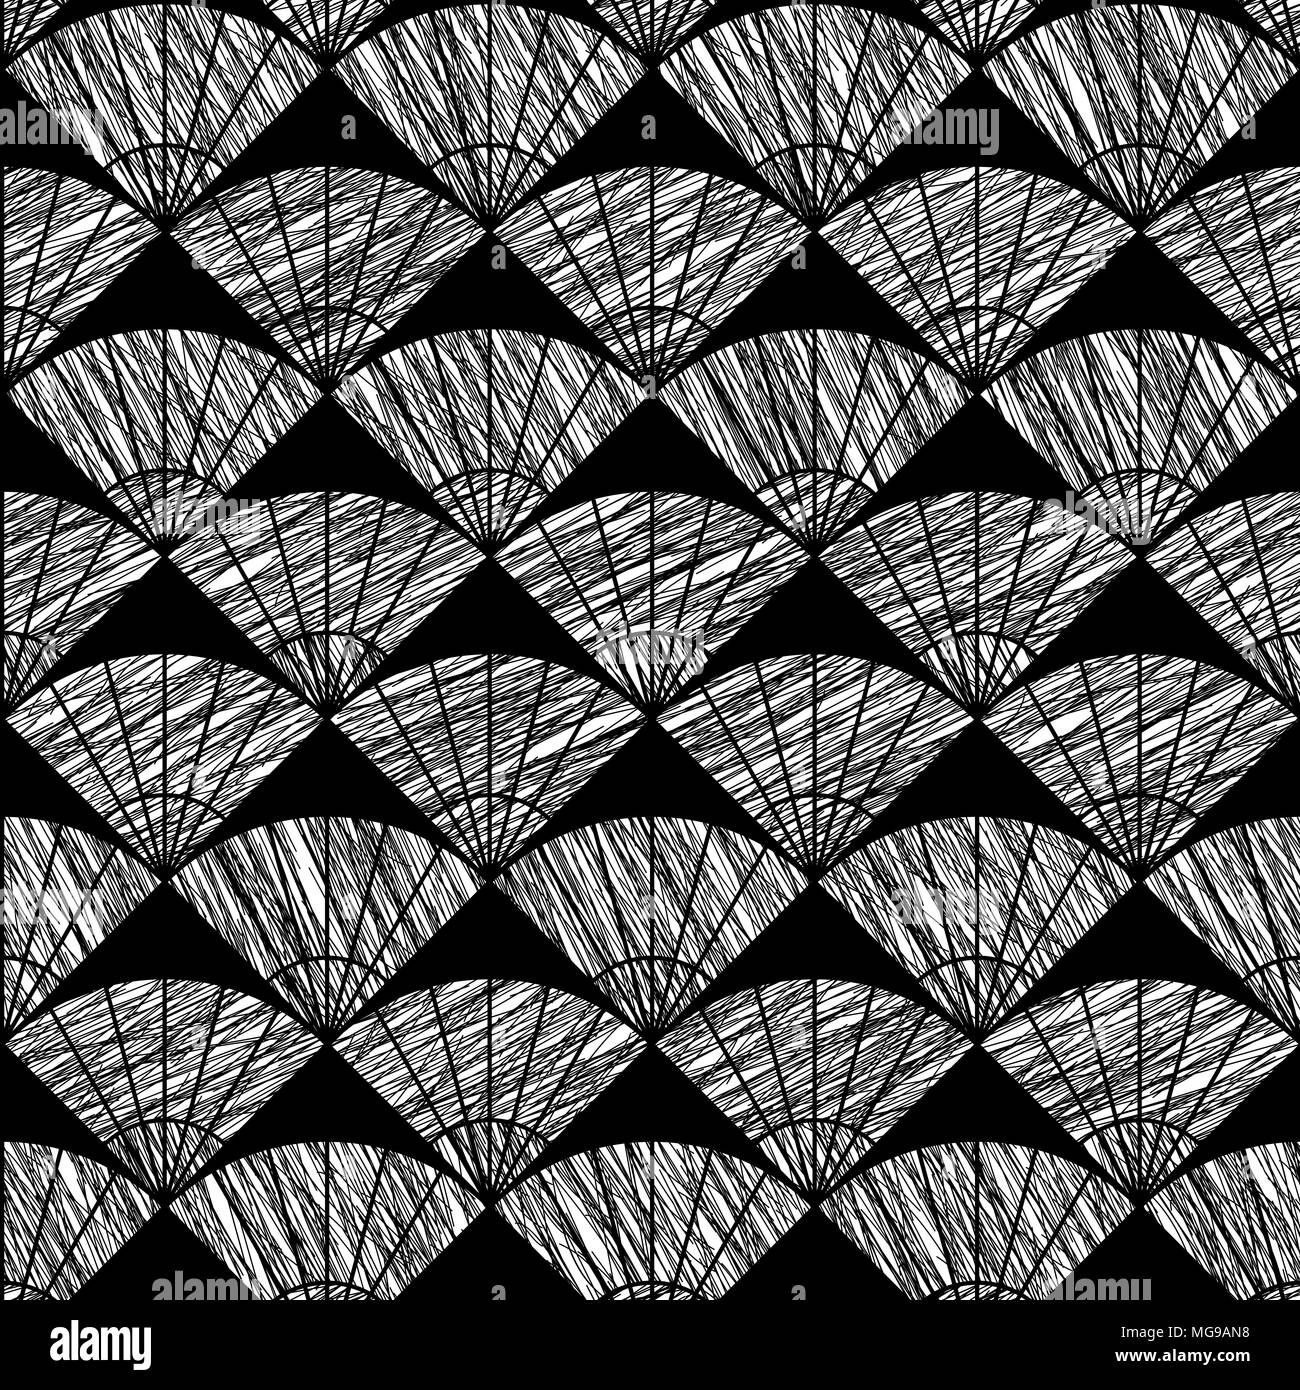 Scratched fan background. Based on Traditional Japanese Embroidery. Abstract Seamless pattern. Based on Sashiko stitching - uchiwa. Monochrome backdro Stock Vector